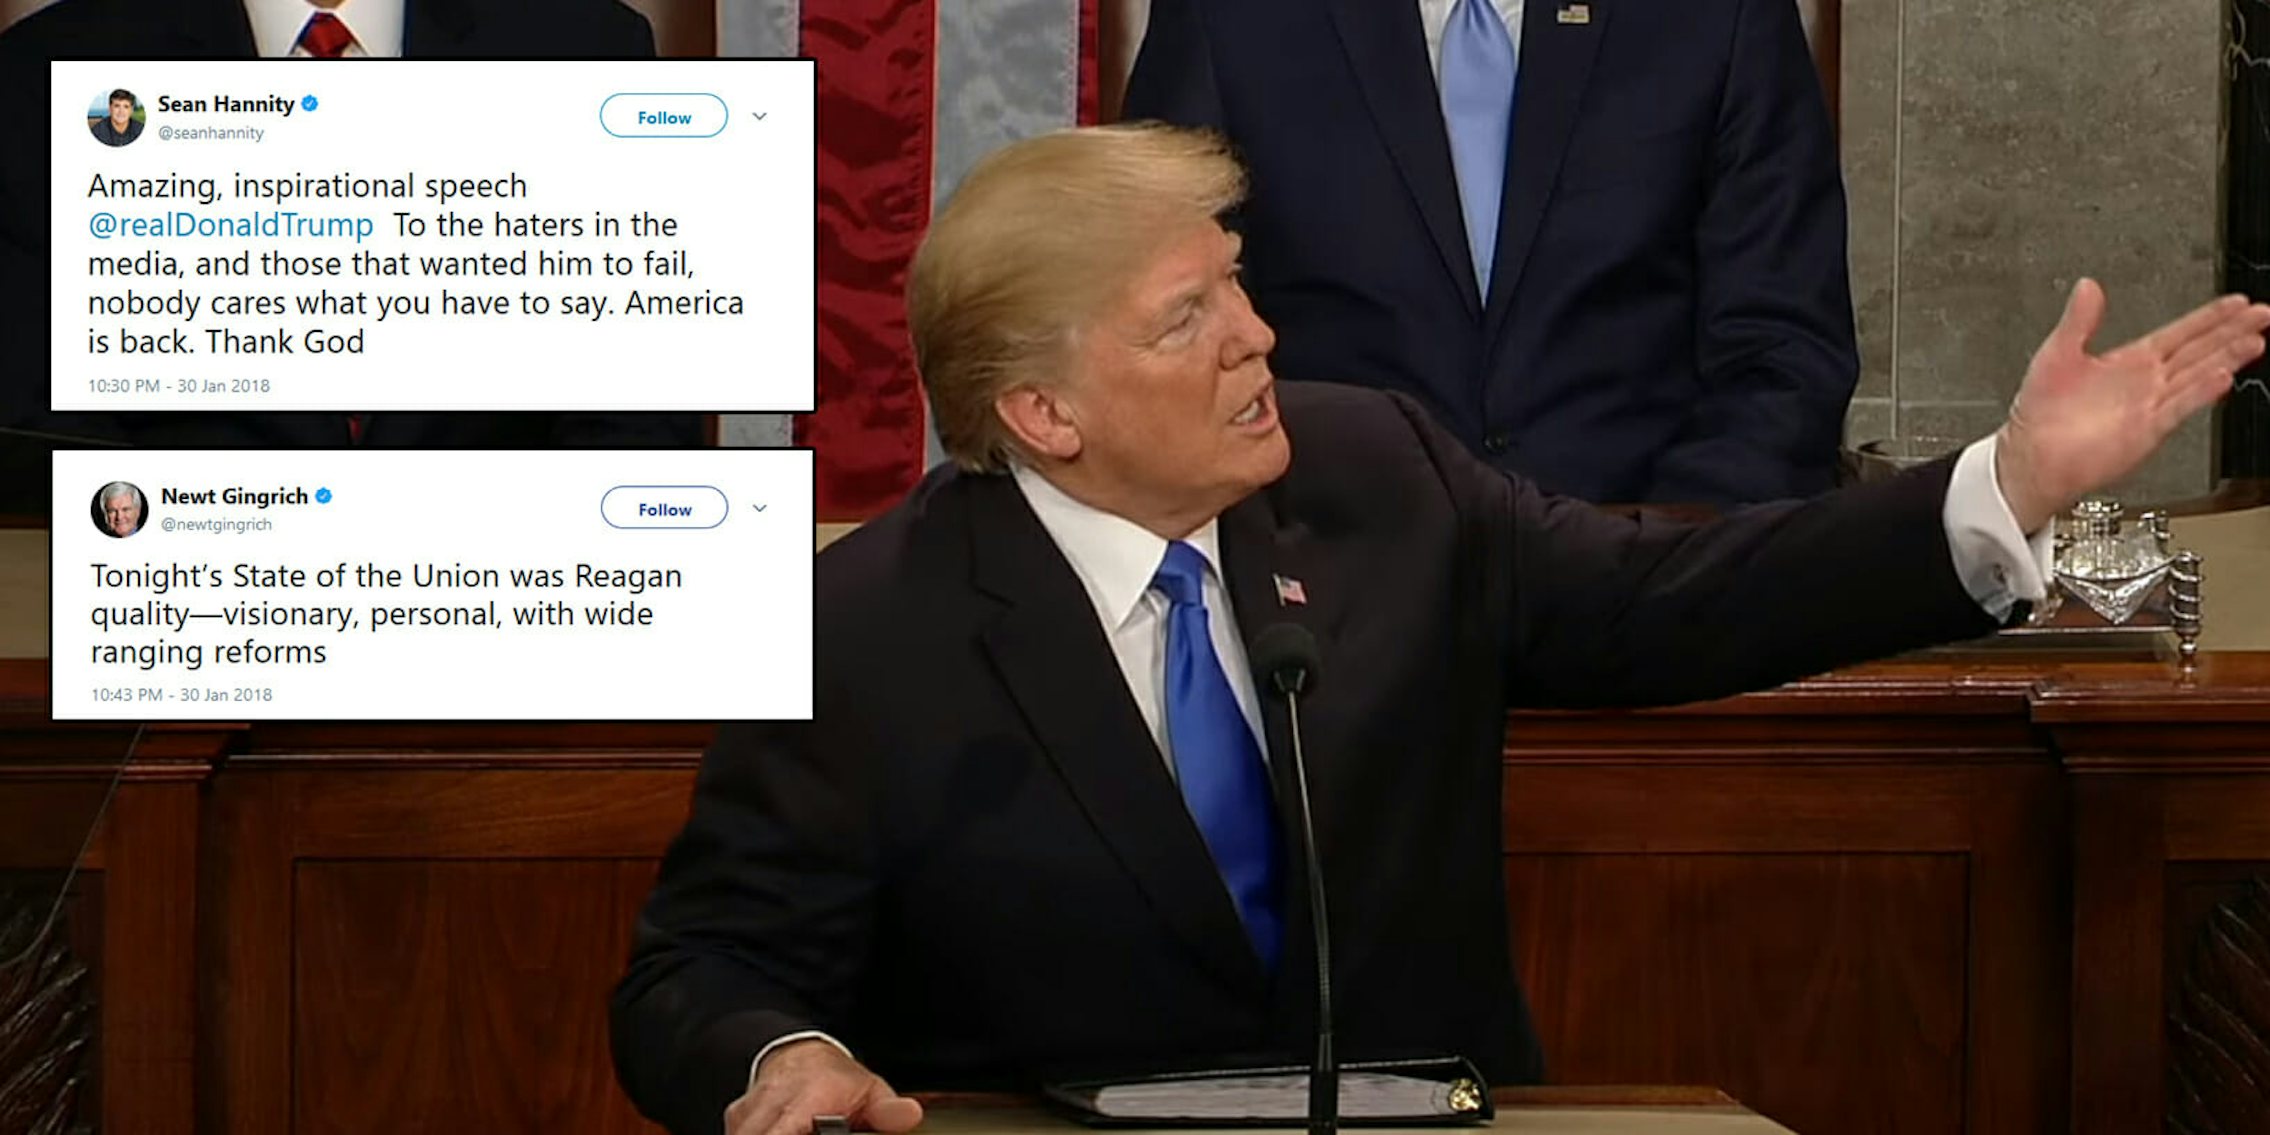 'Amazing,' 'inspirational,' and 'visionary' were just some of the words used by conservatives to heap praise on Trump's first State of the Union address.